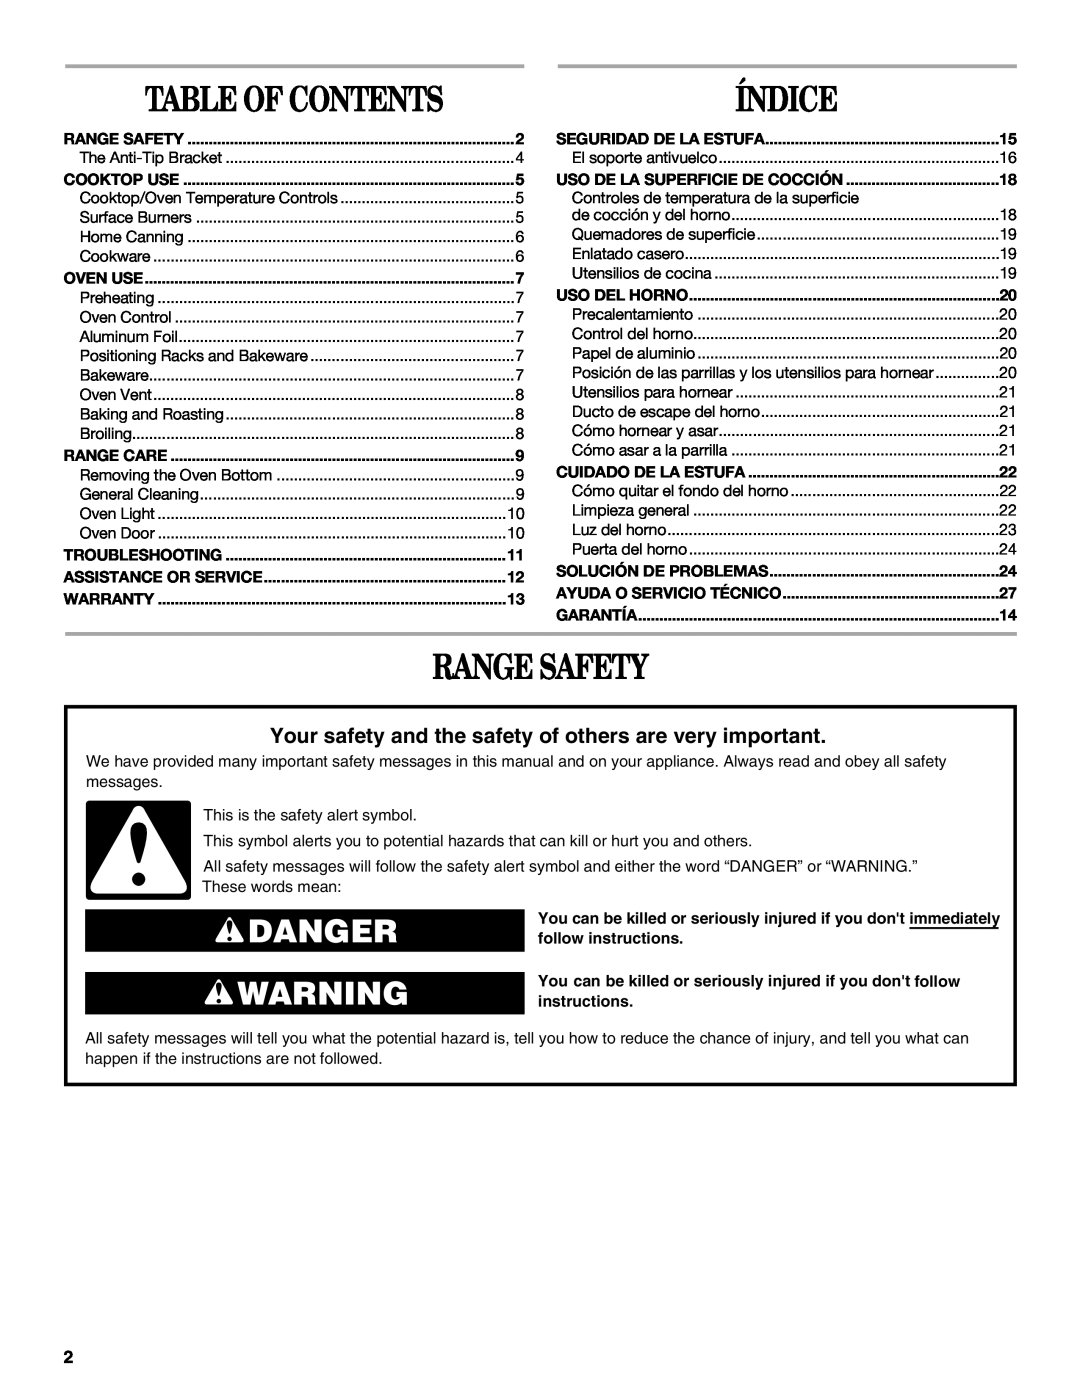 Amana W10181330A manual Table Of Contents, Range Safety, Danger, Índice 